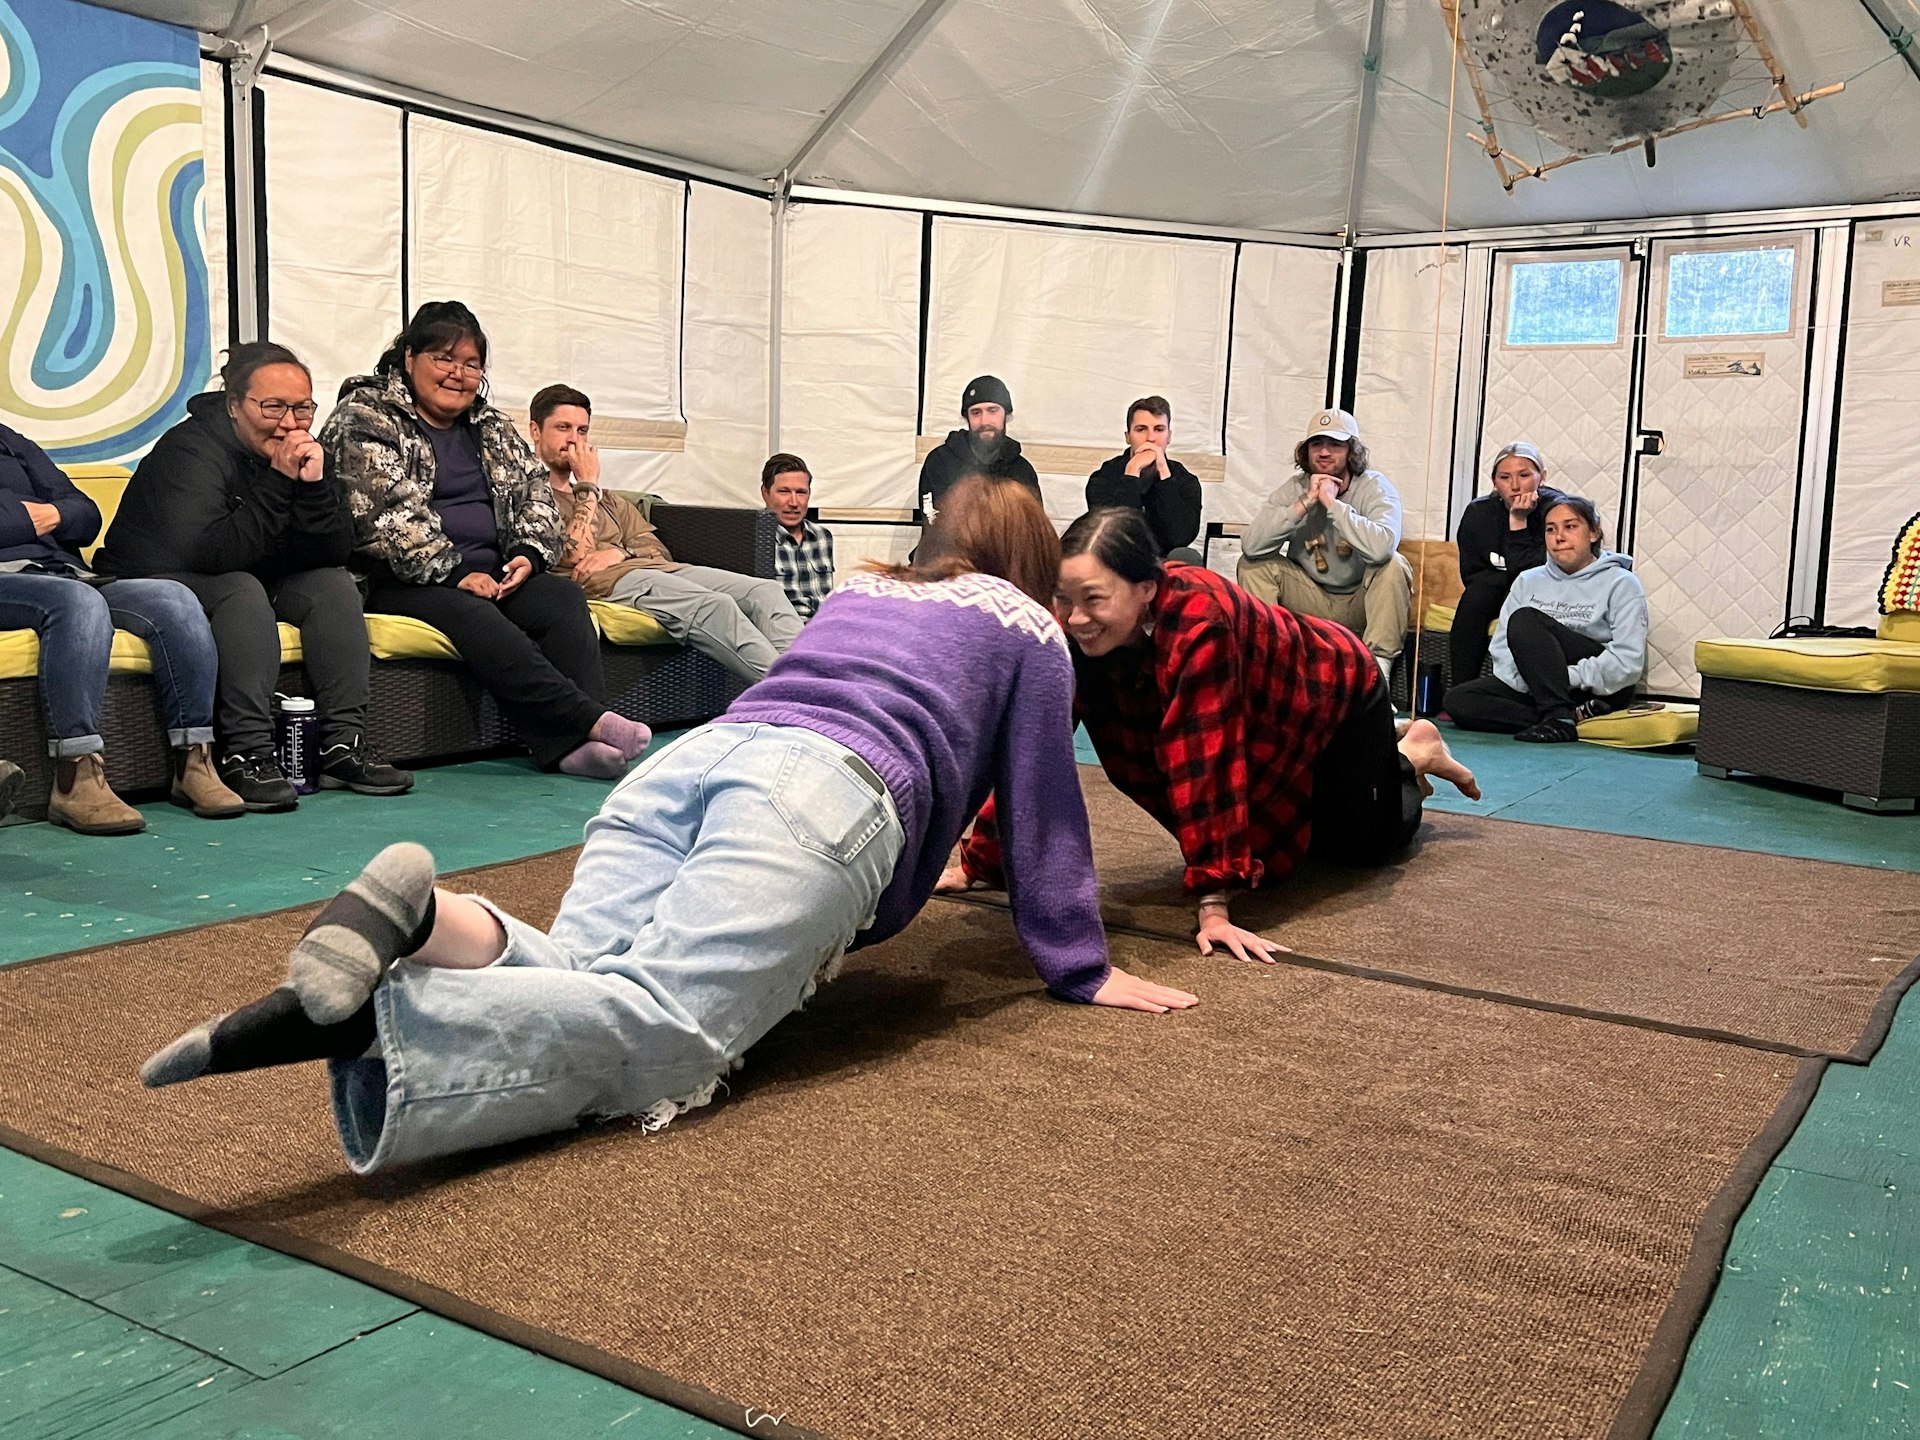 People face each other in a plank position on the floor while other people sit around the edge of the tent watching the games 